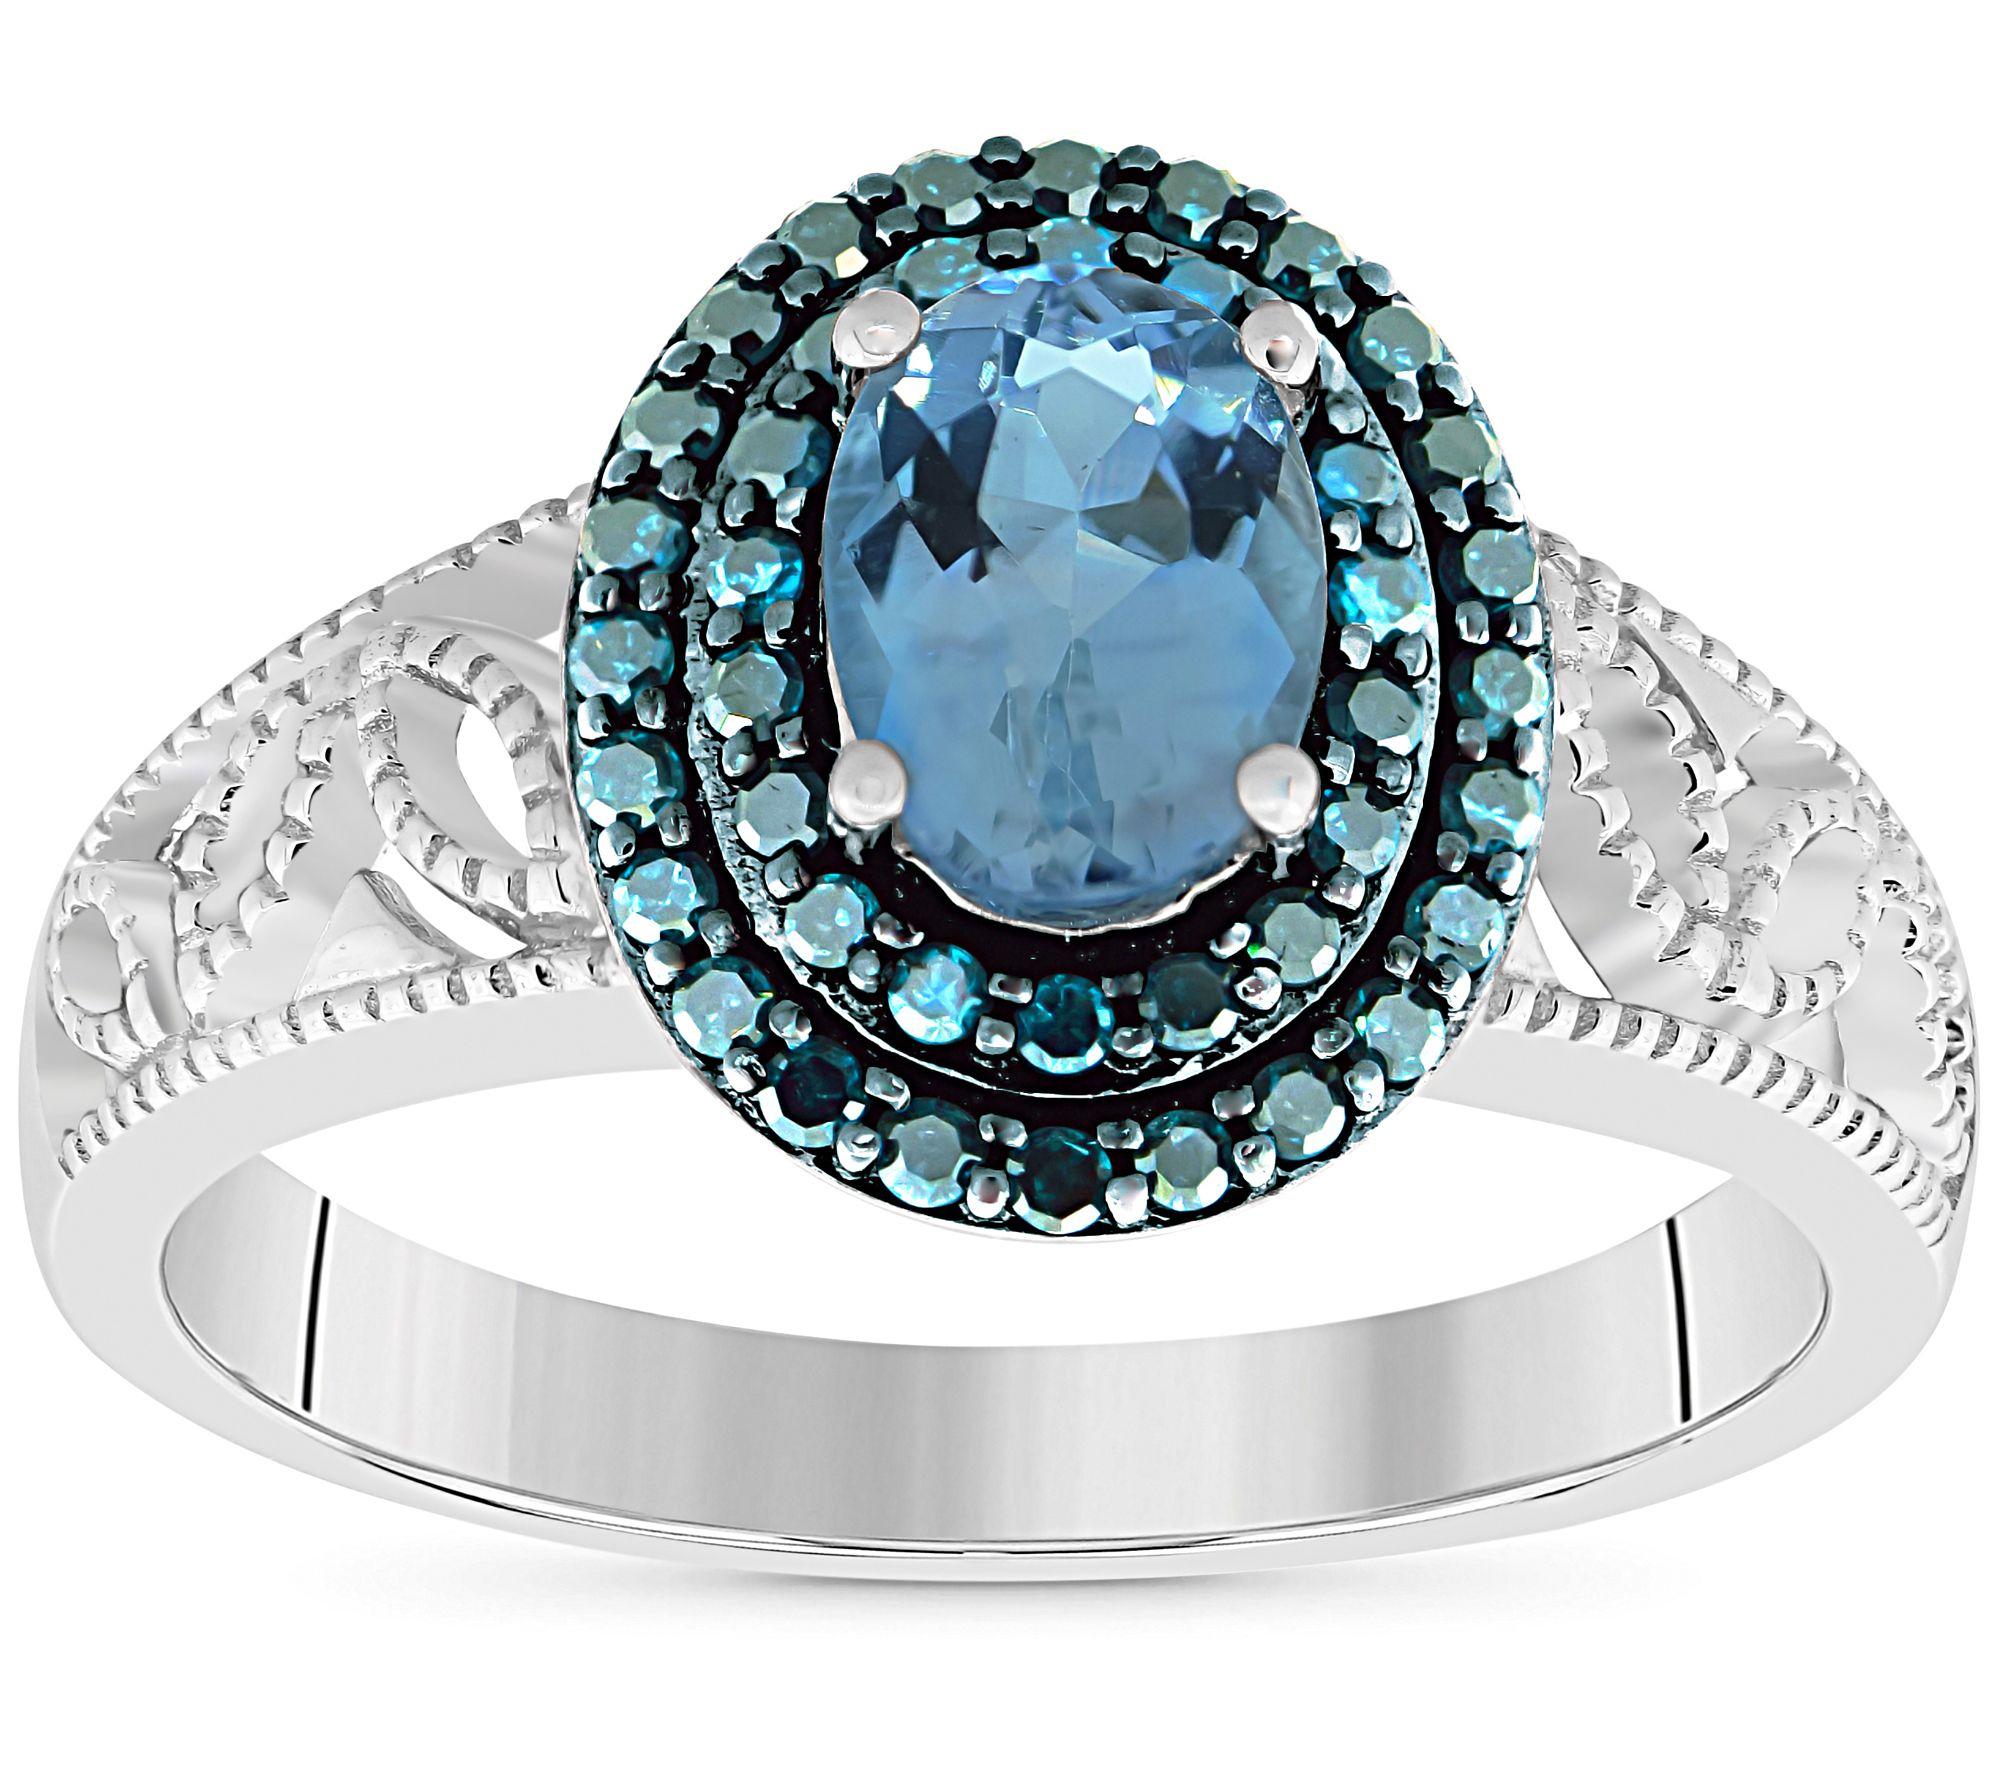 Jewel Zone US Simulated Aquamarine & White Topaz CZ Solitaire Ring in 14k Gold Over Sterling Silver 1.44 Cttw